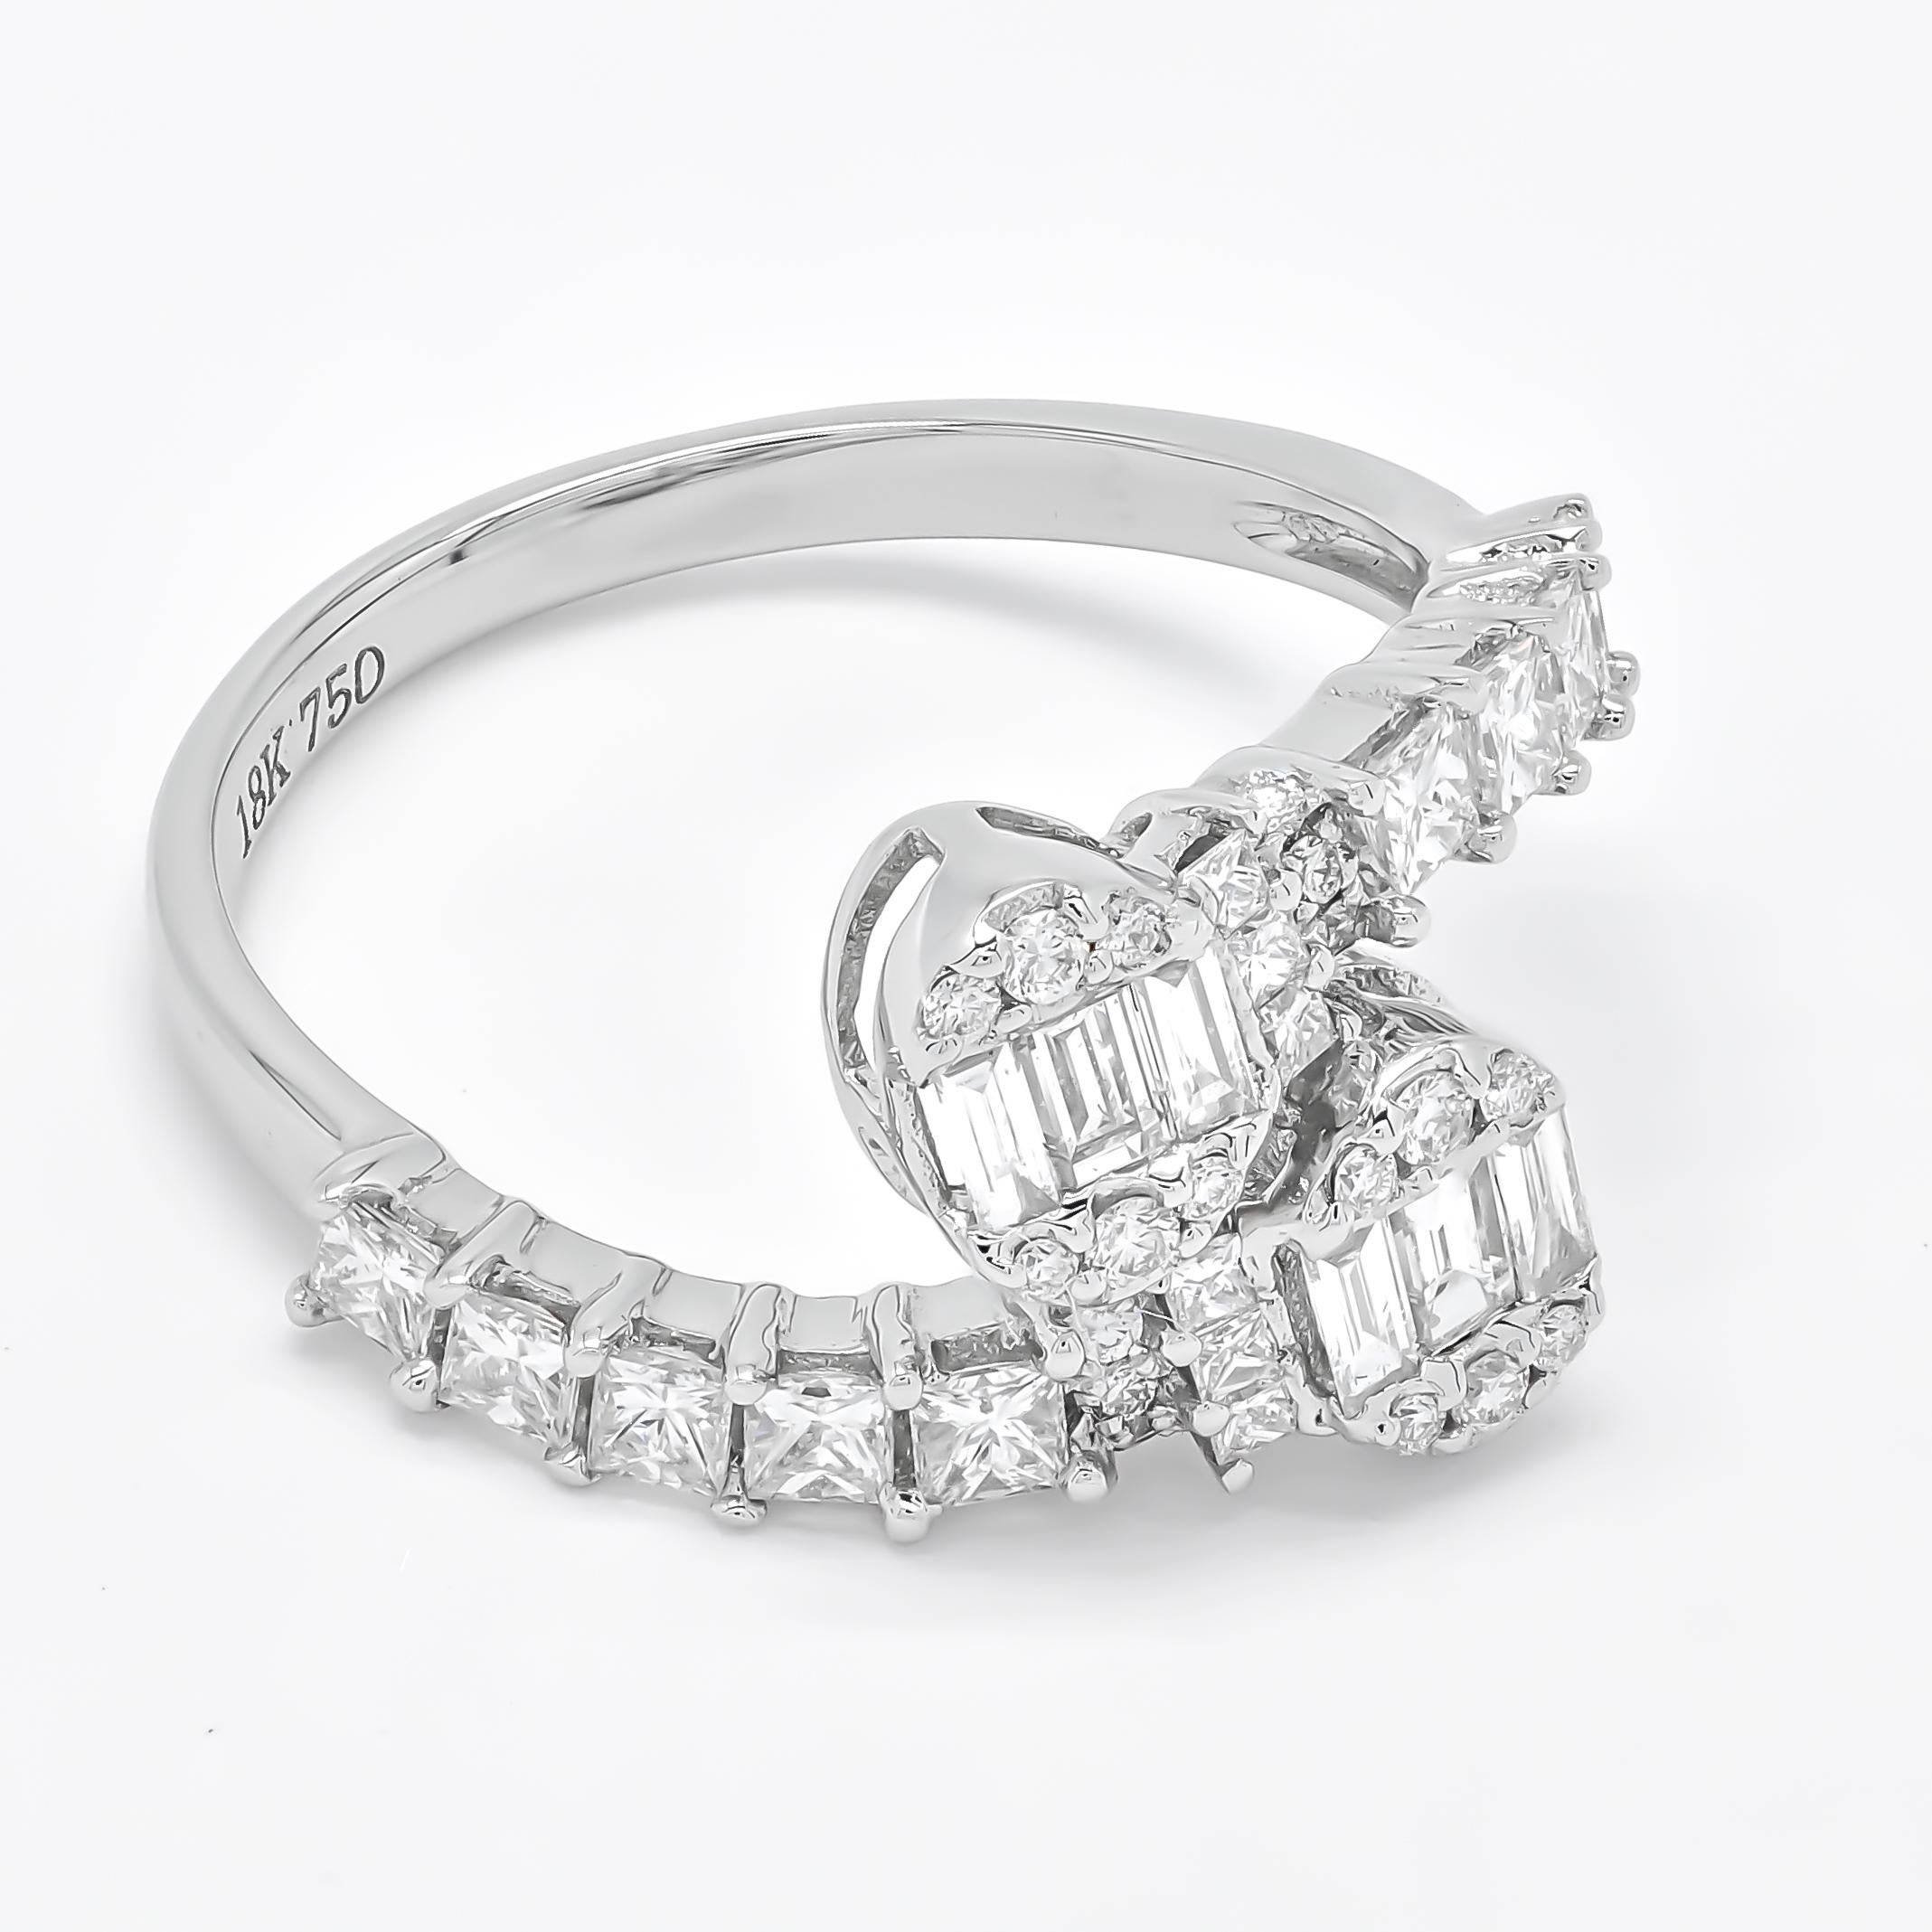 Astounding elegance and astonishing shine emanate from every facet of this incredibly beautiful. Fashioned in a fabulous Oval Shape cluster illusion, this ring incorporates Baguette and round-shape set for brilliance and artistry with Princess Cut